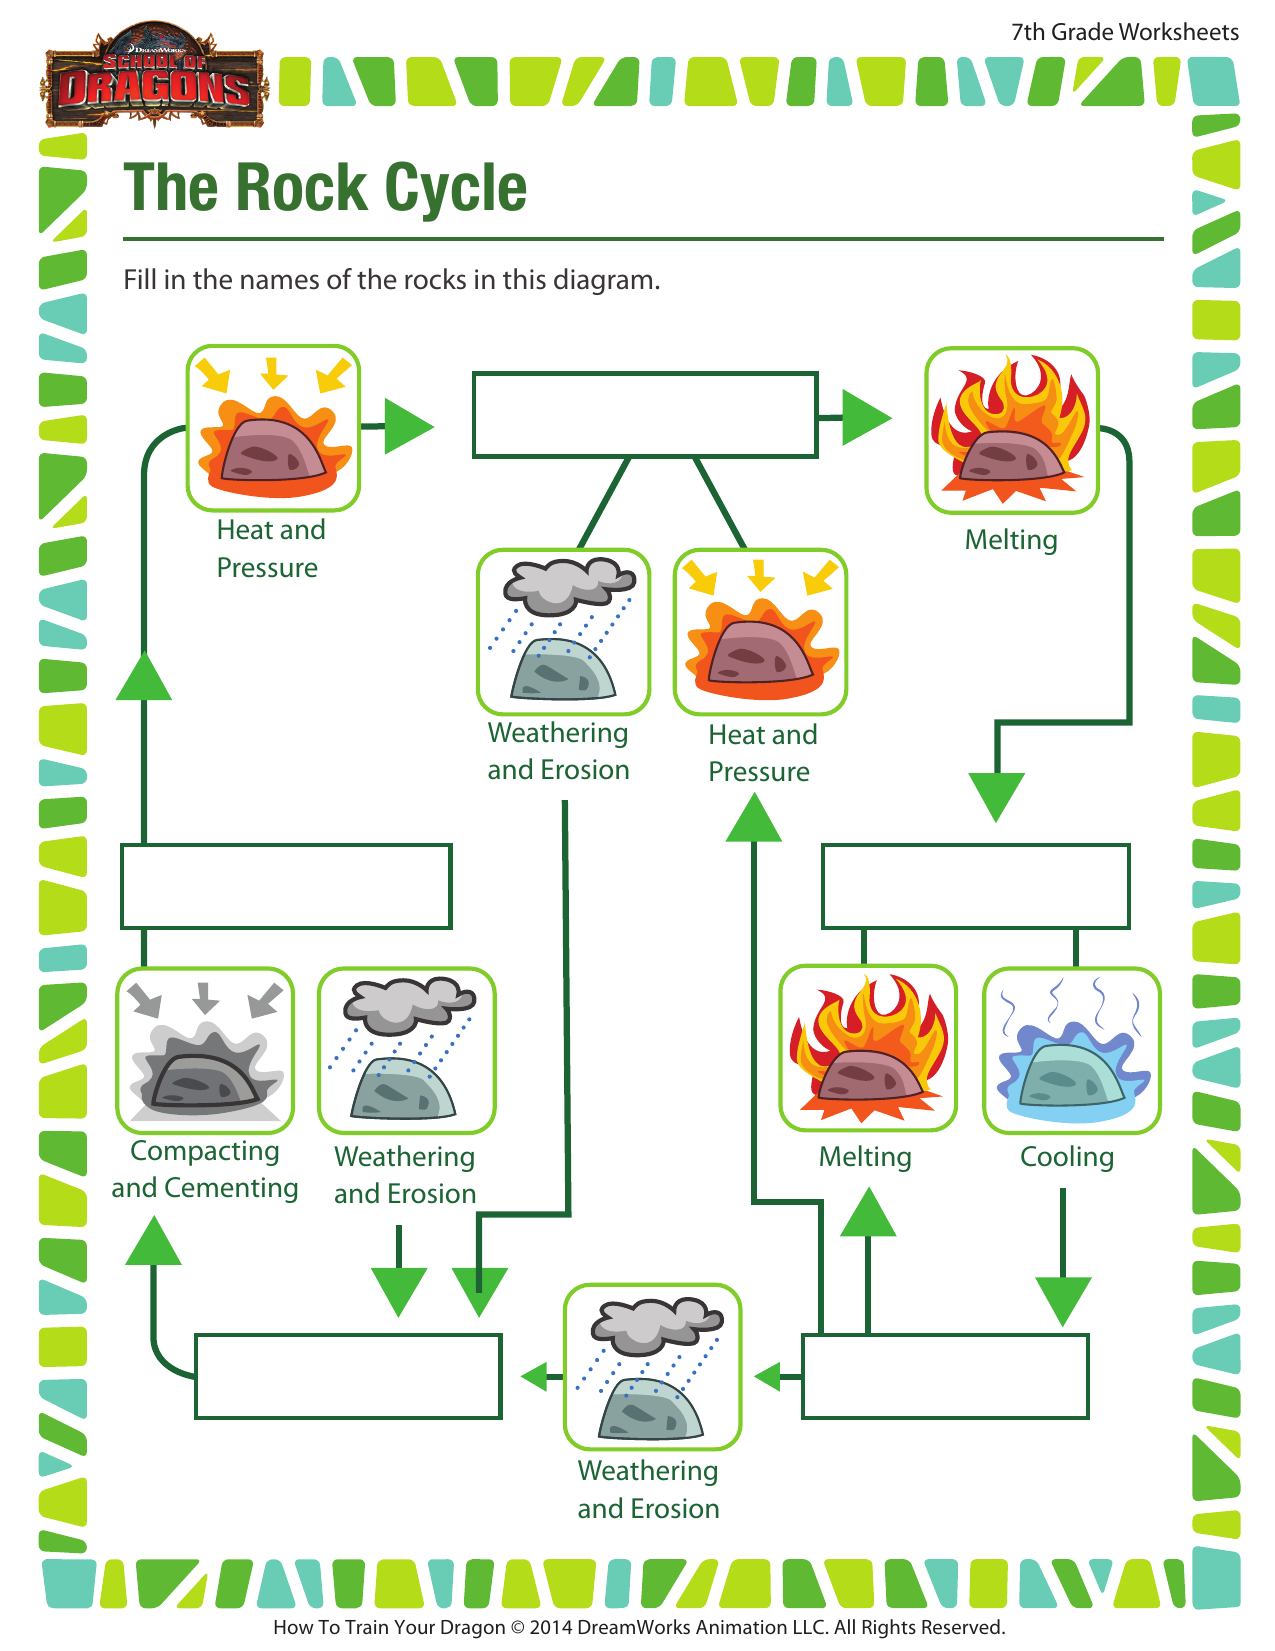 The Rock Cycle Worksheet